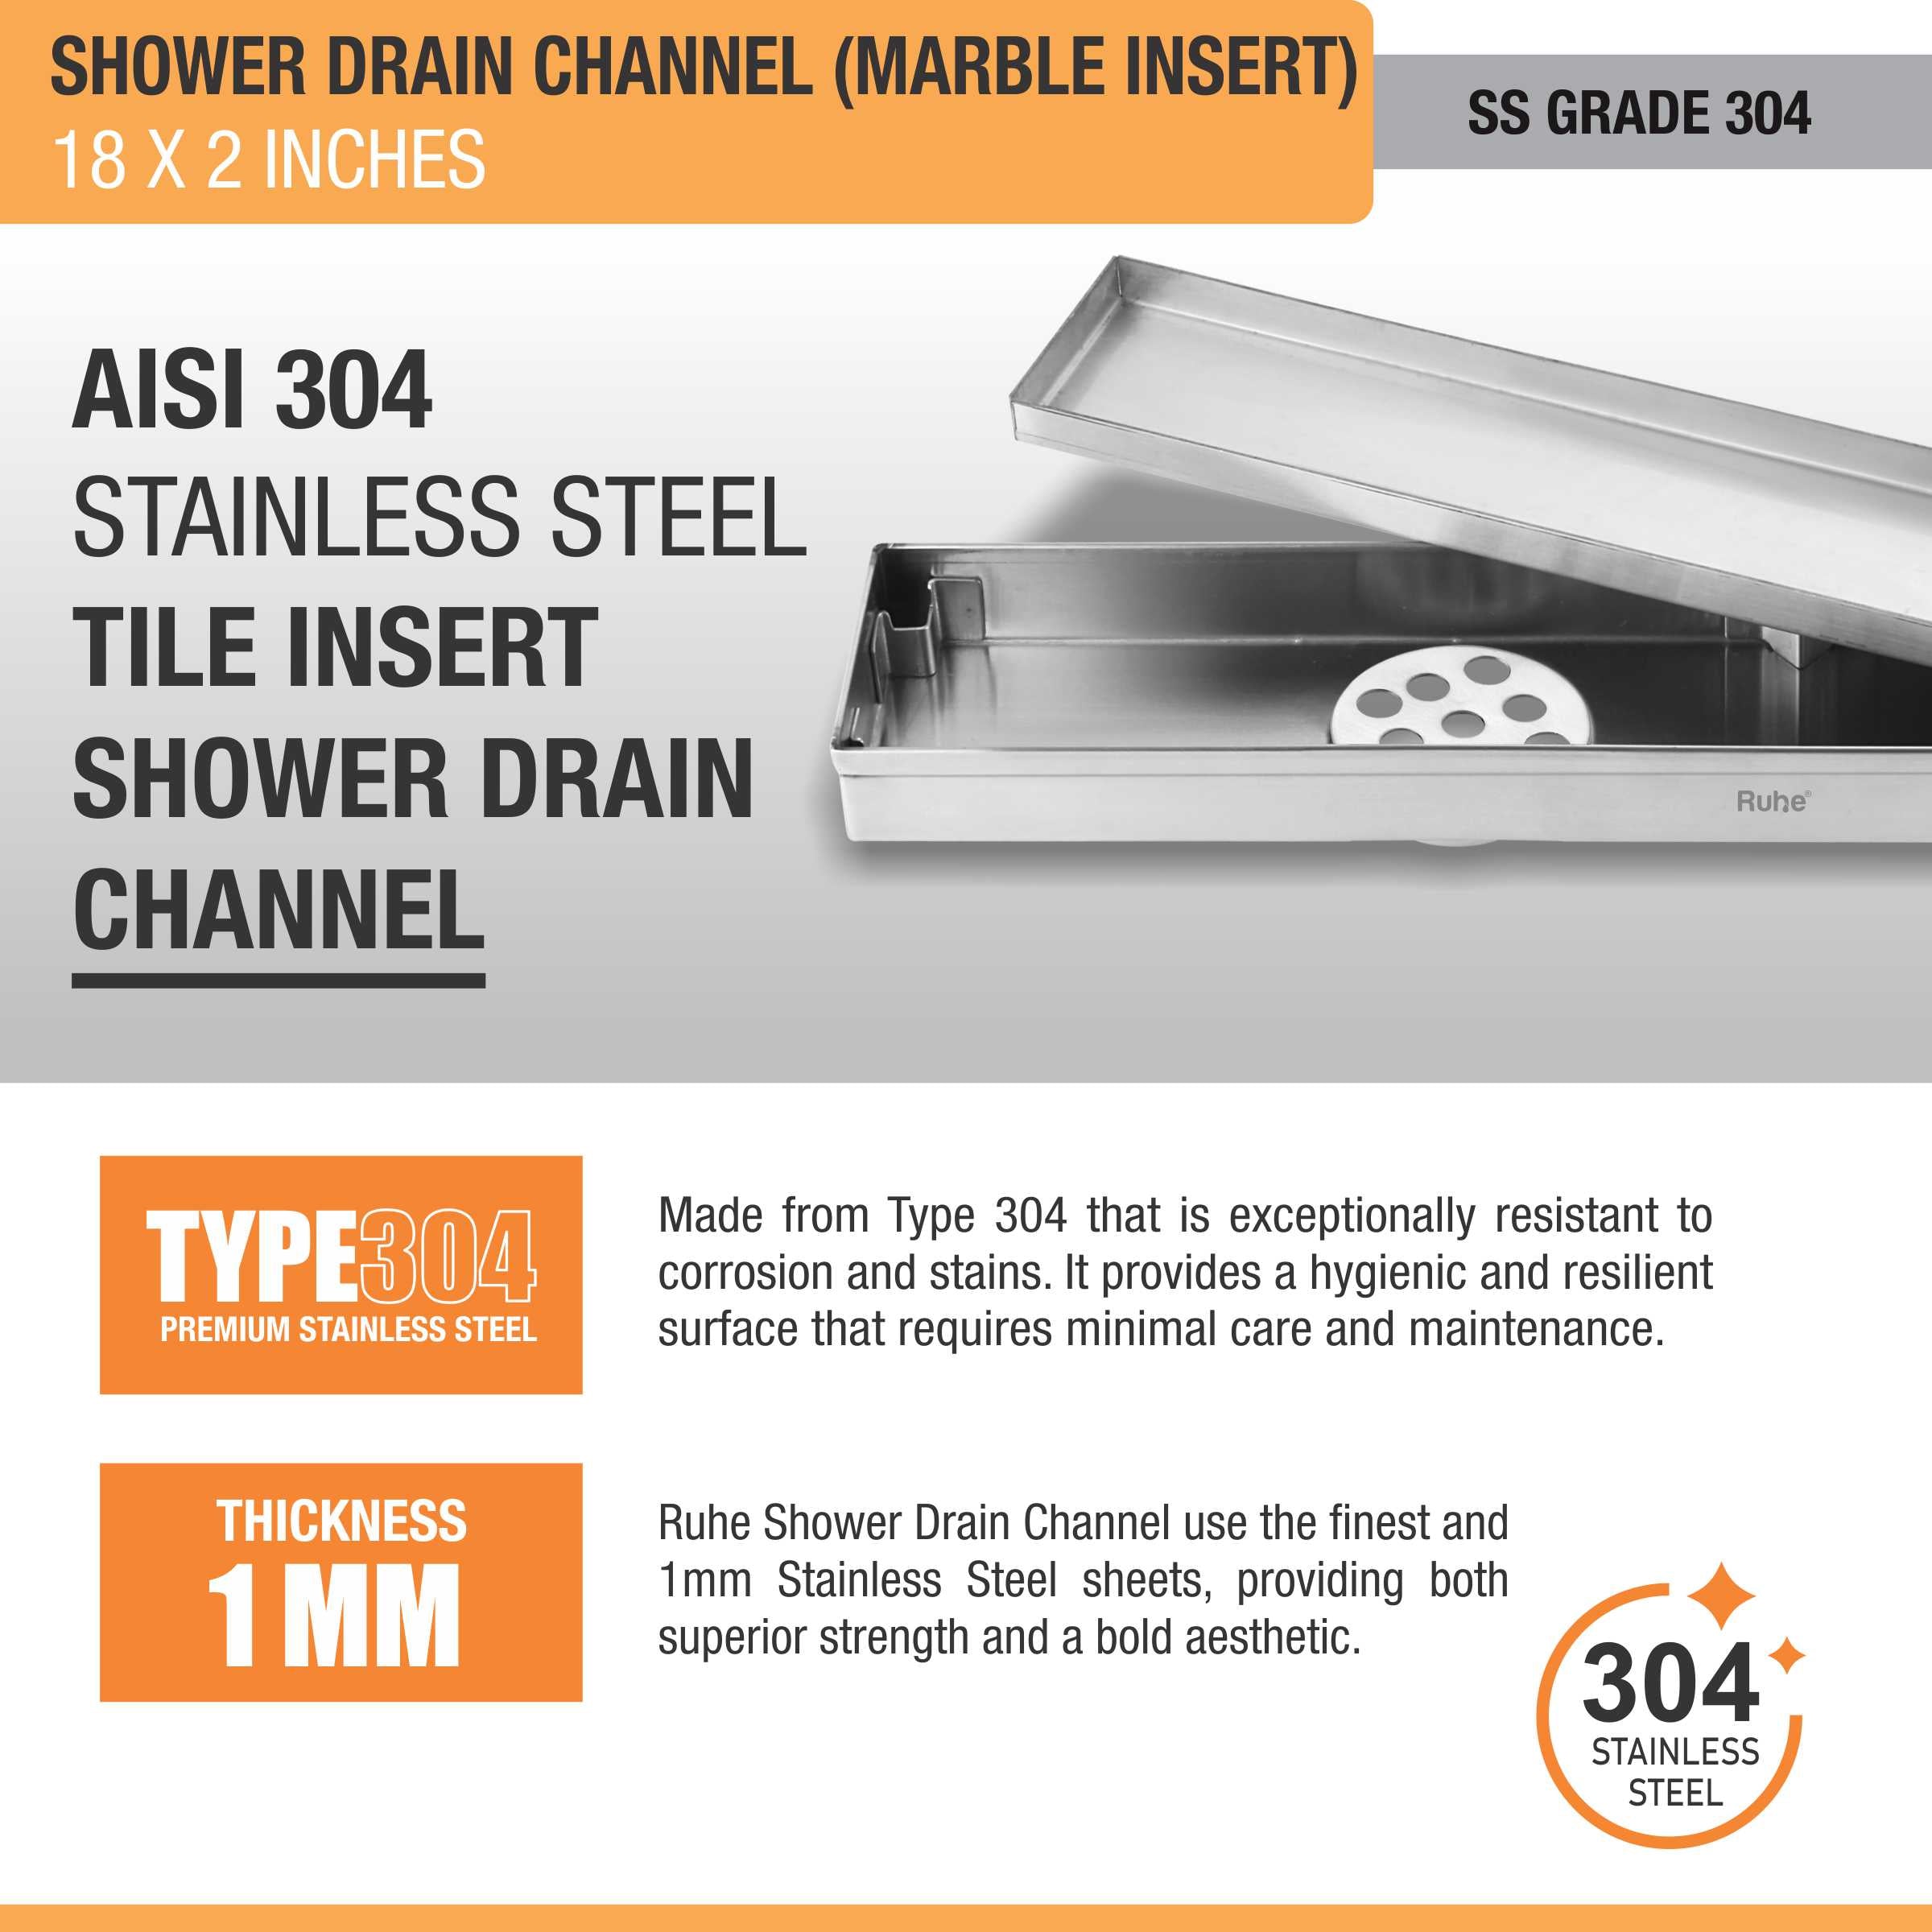 Marble Insert Shower Drain Channel (18 x 2 Inches) (304 Grade) stainless steel